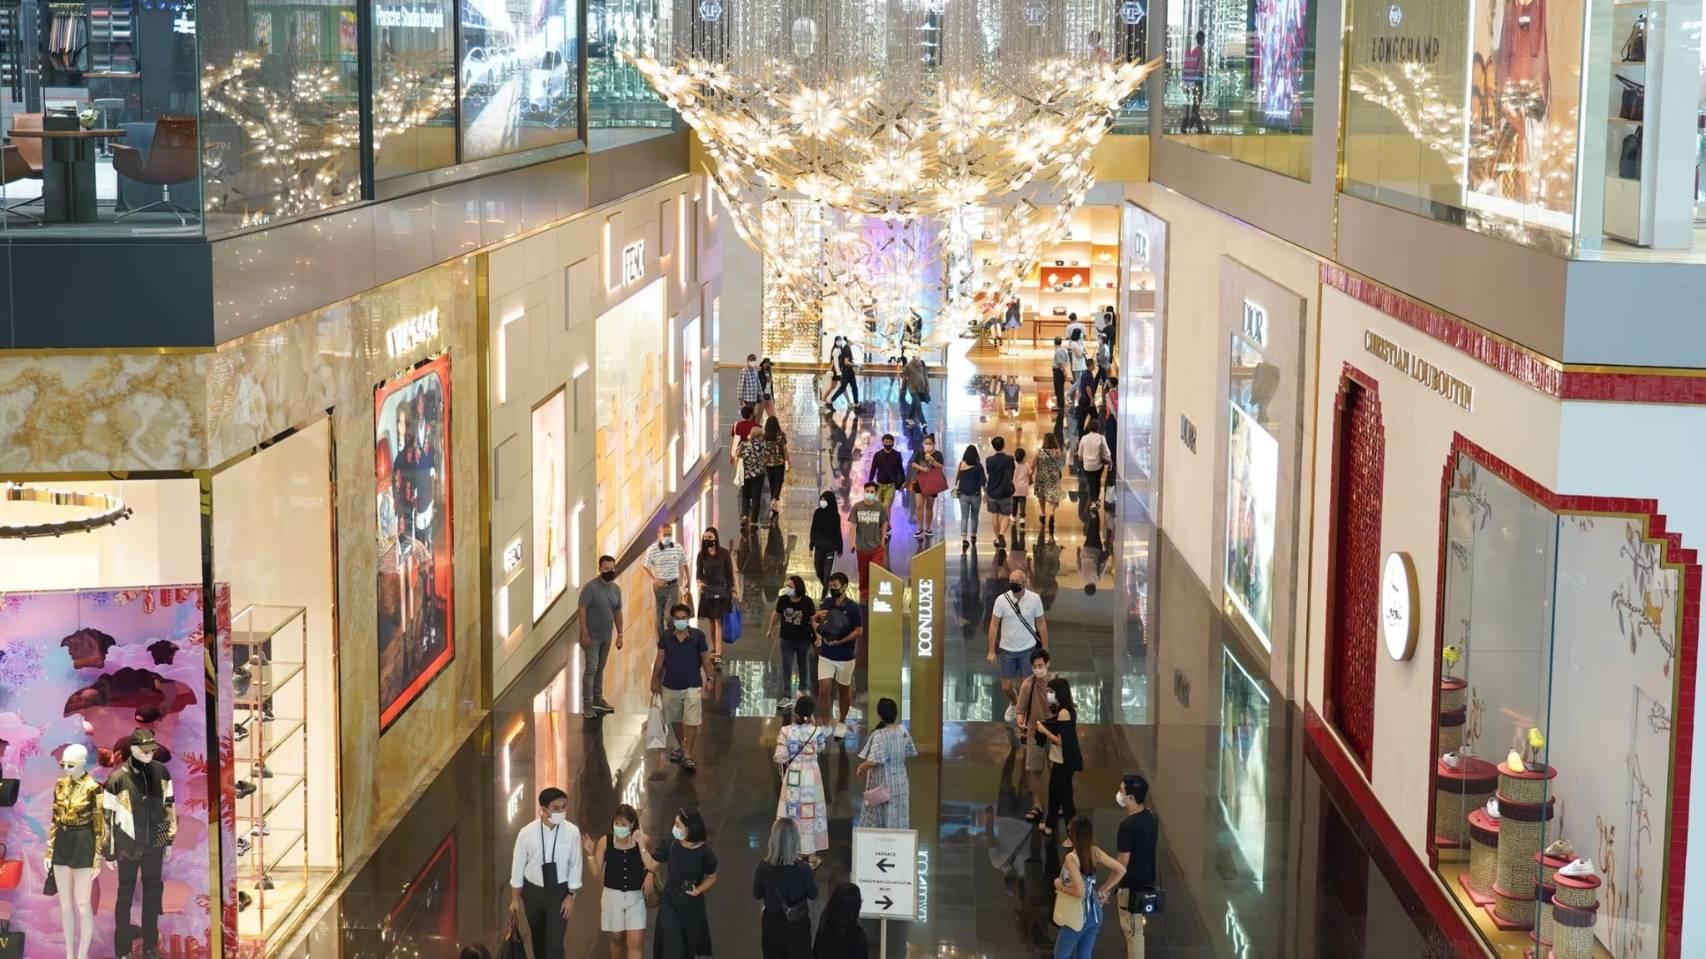 ICONSIAM : Shopping : ICONLUXE, The center of World-class Luxury